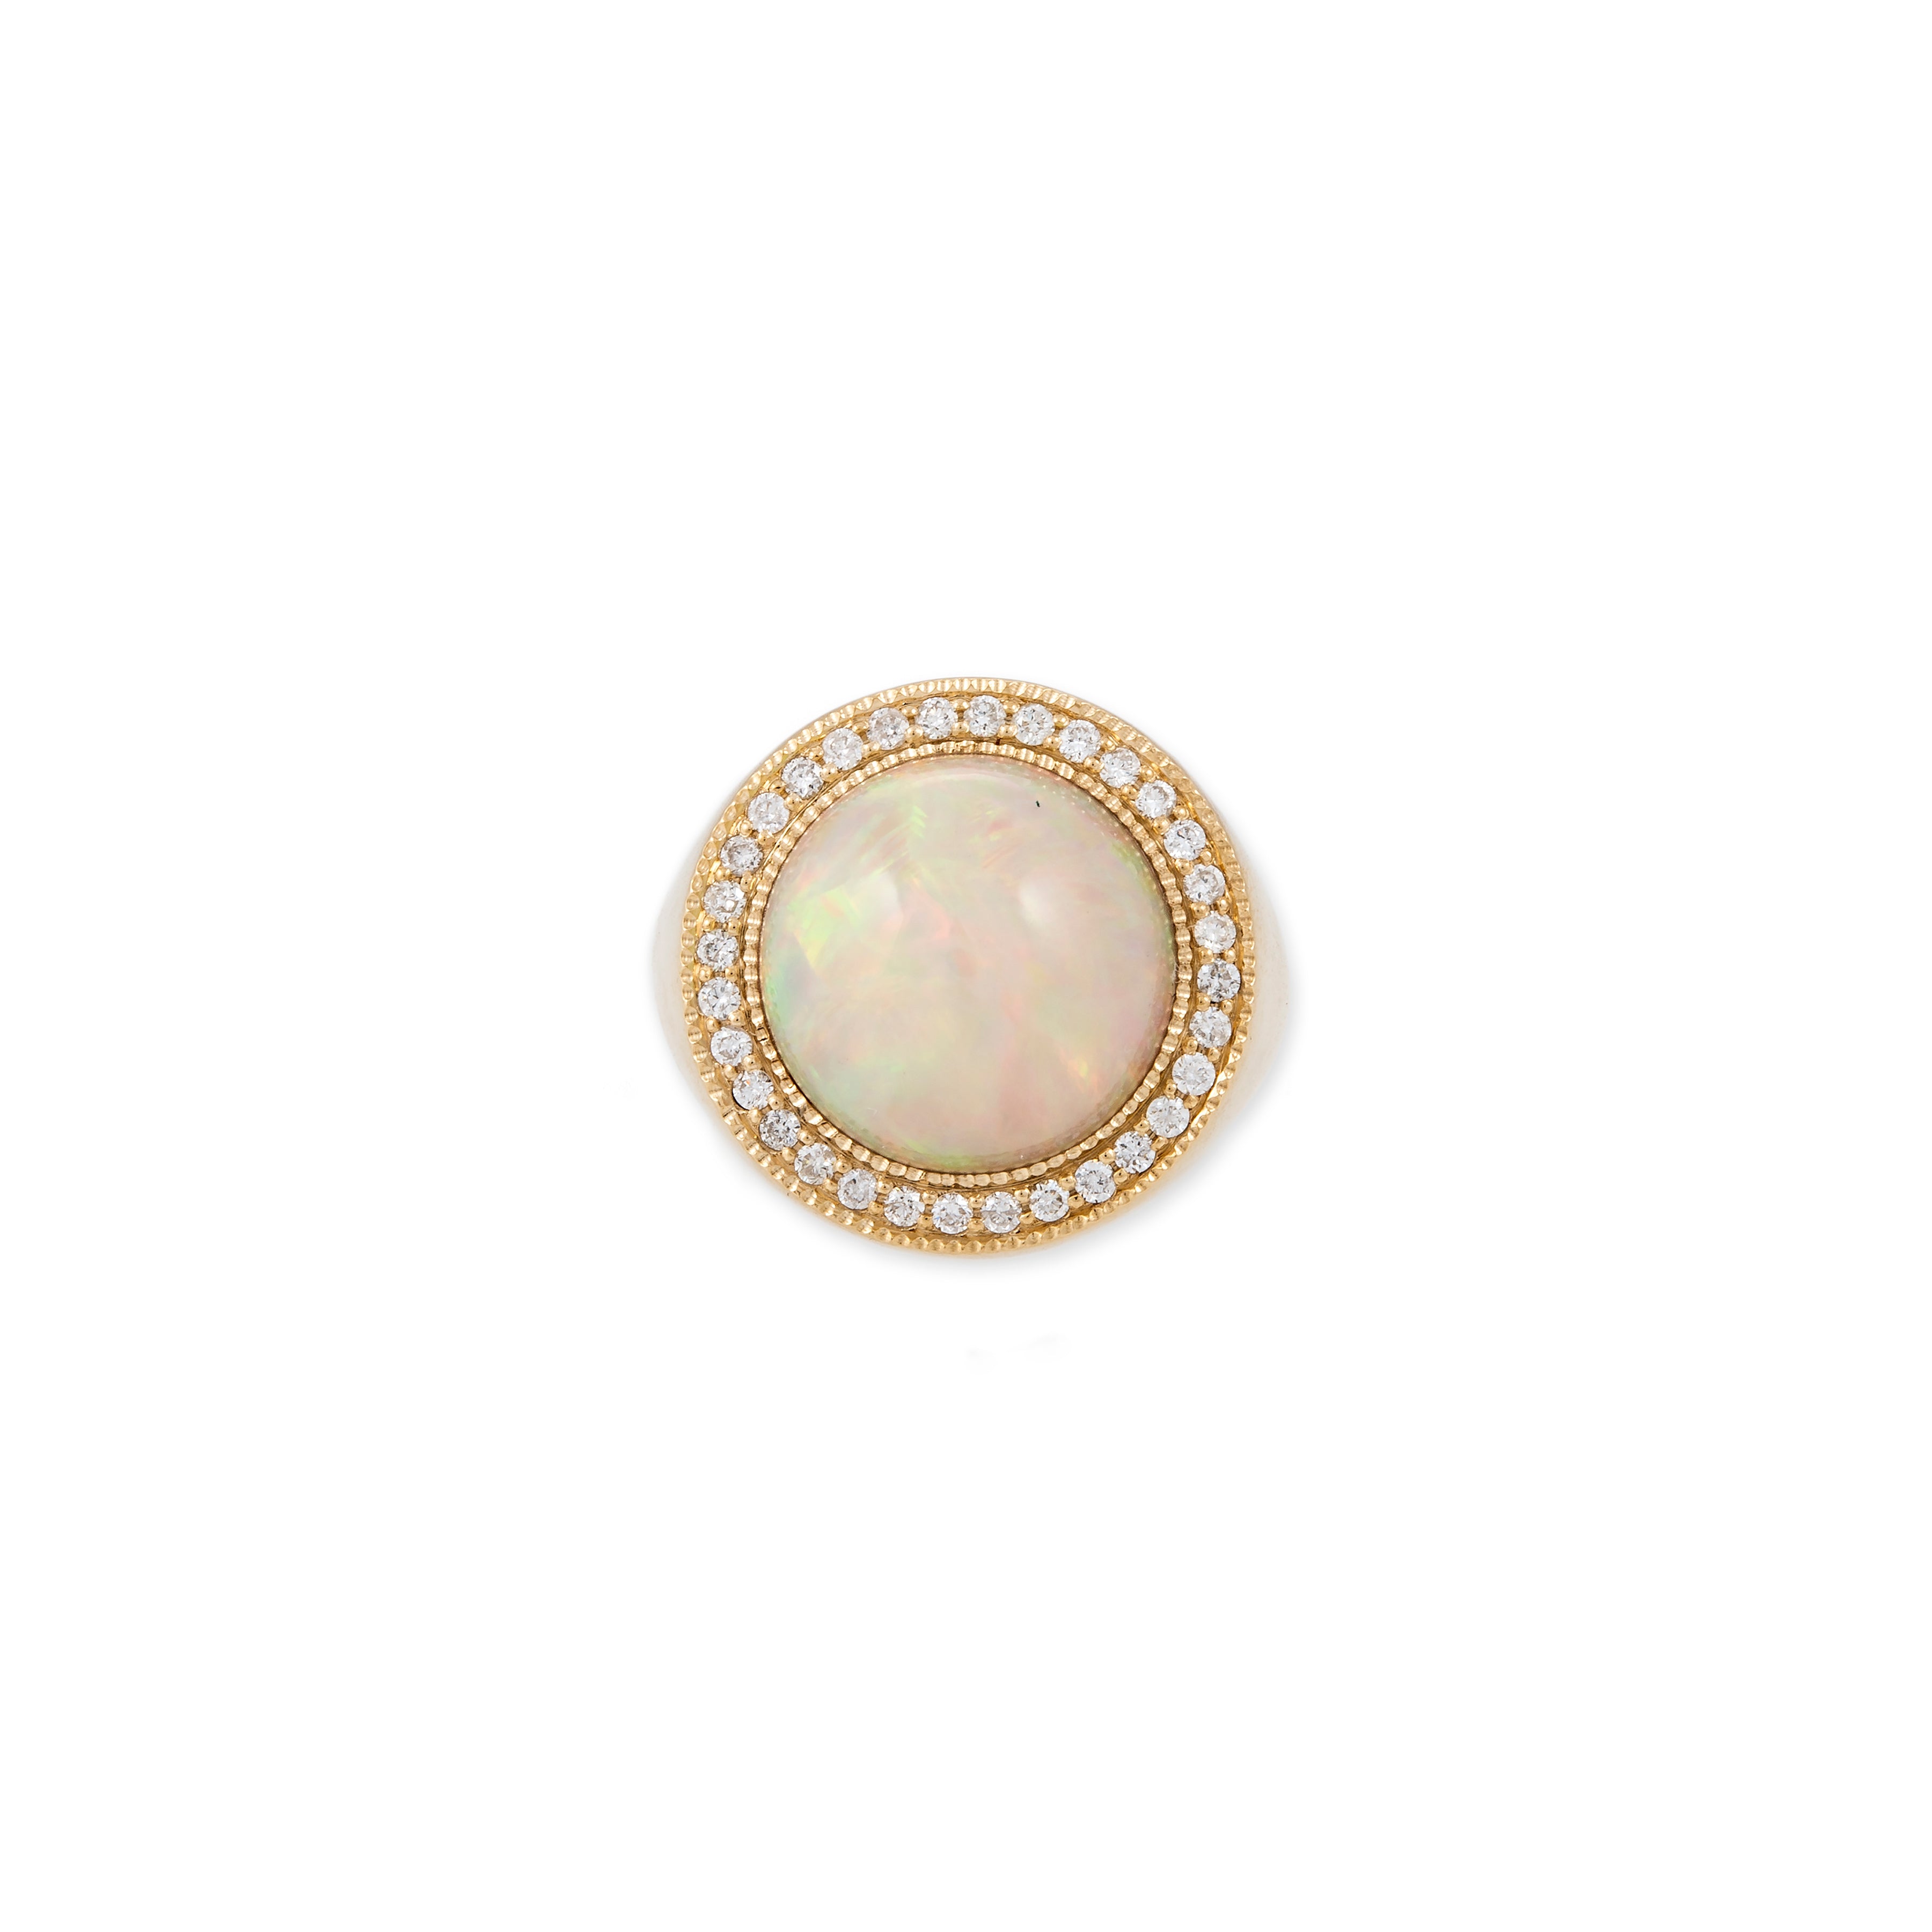 PAVE ROUND OPAL RING